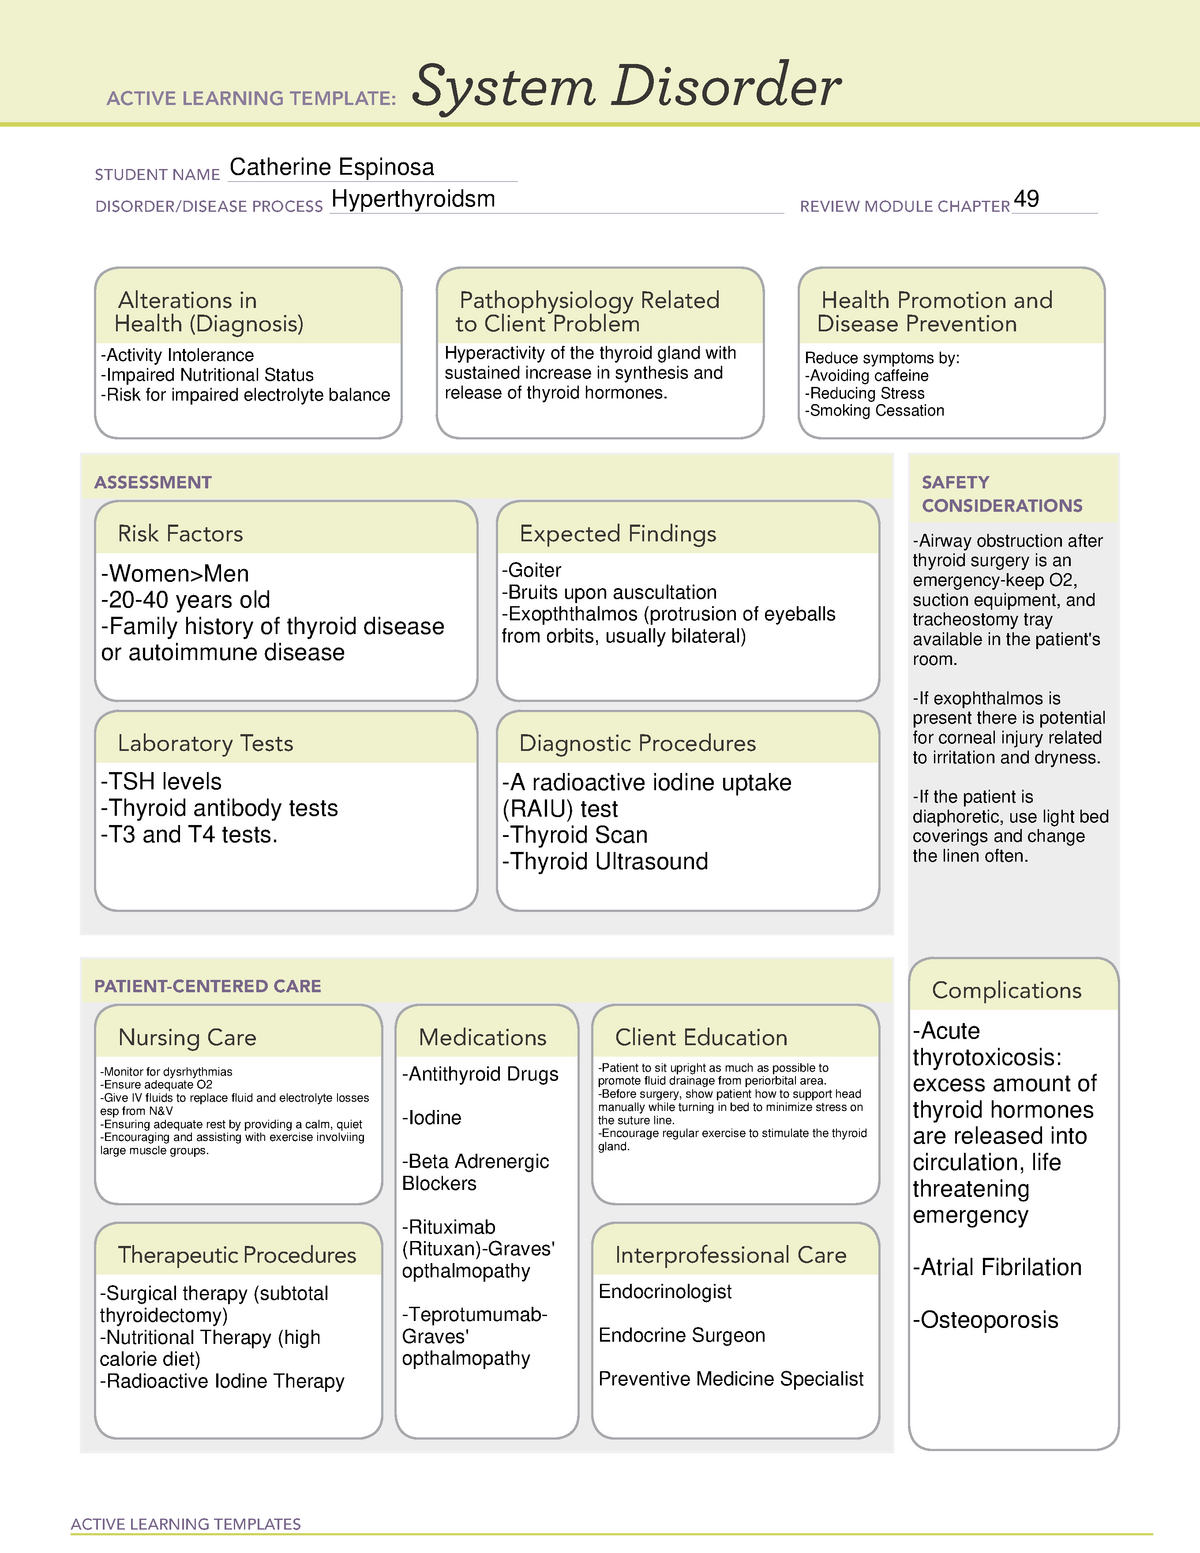 Hyperthyroidism System Disorder ACTIVE LEARNING TEMPLATES System